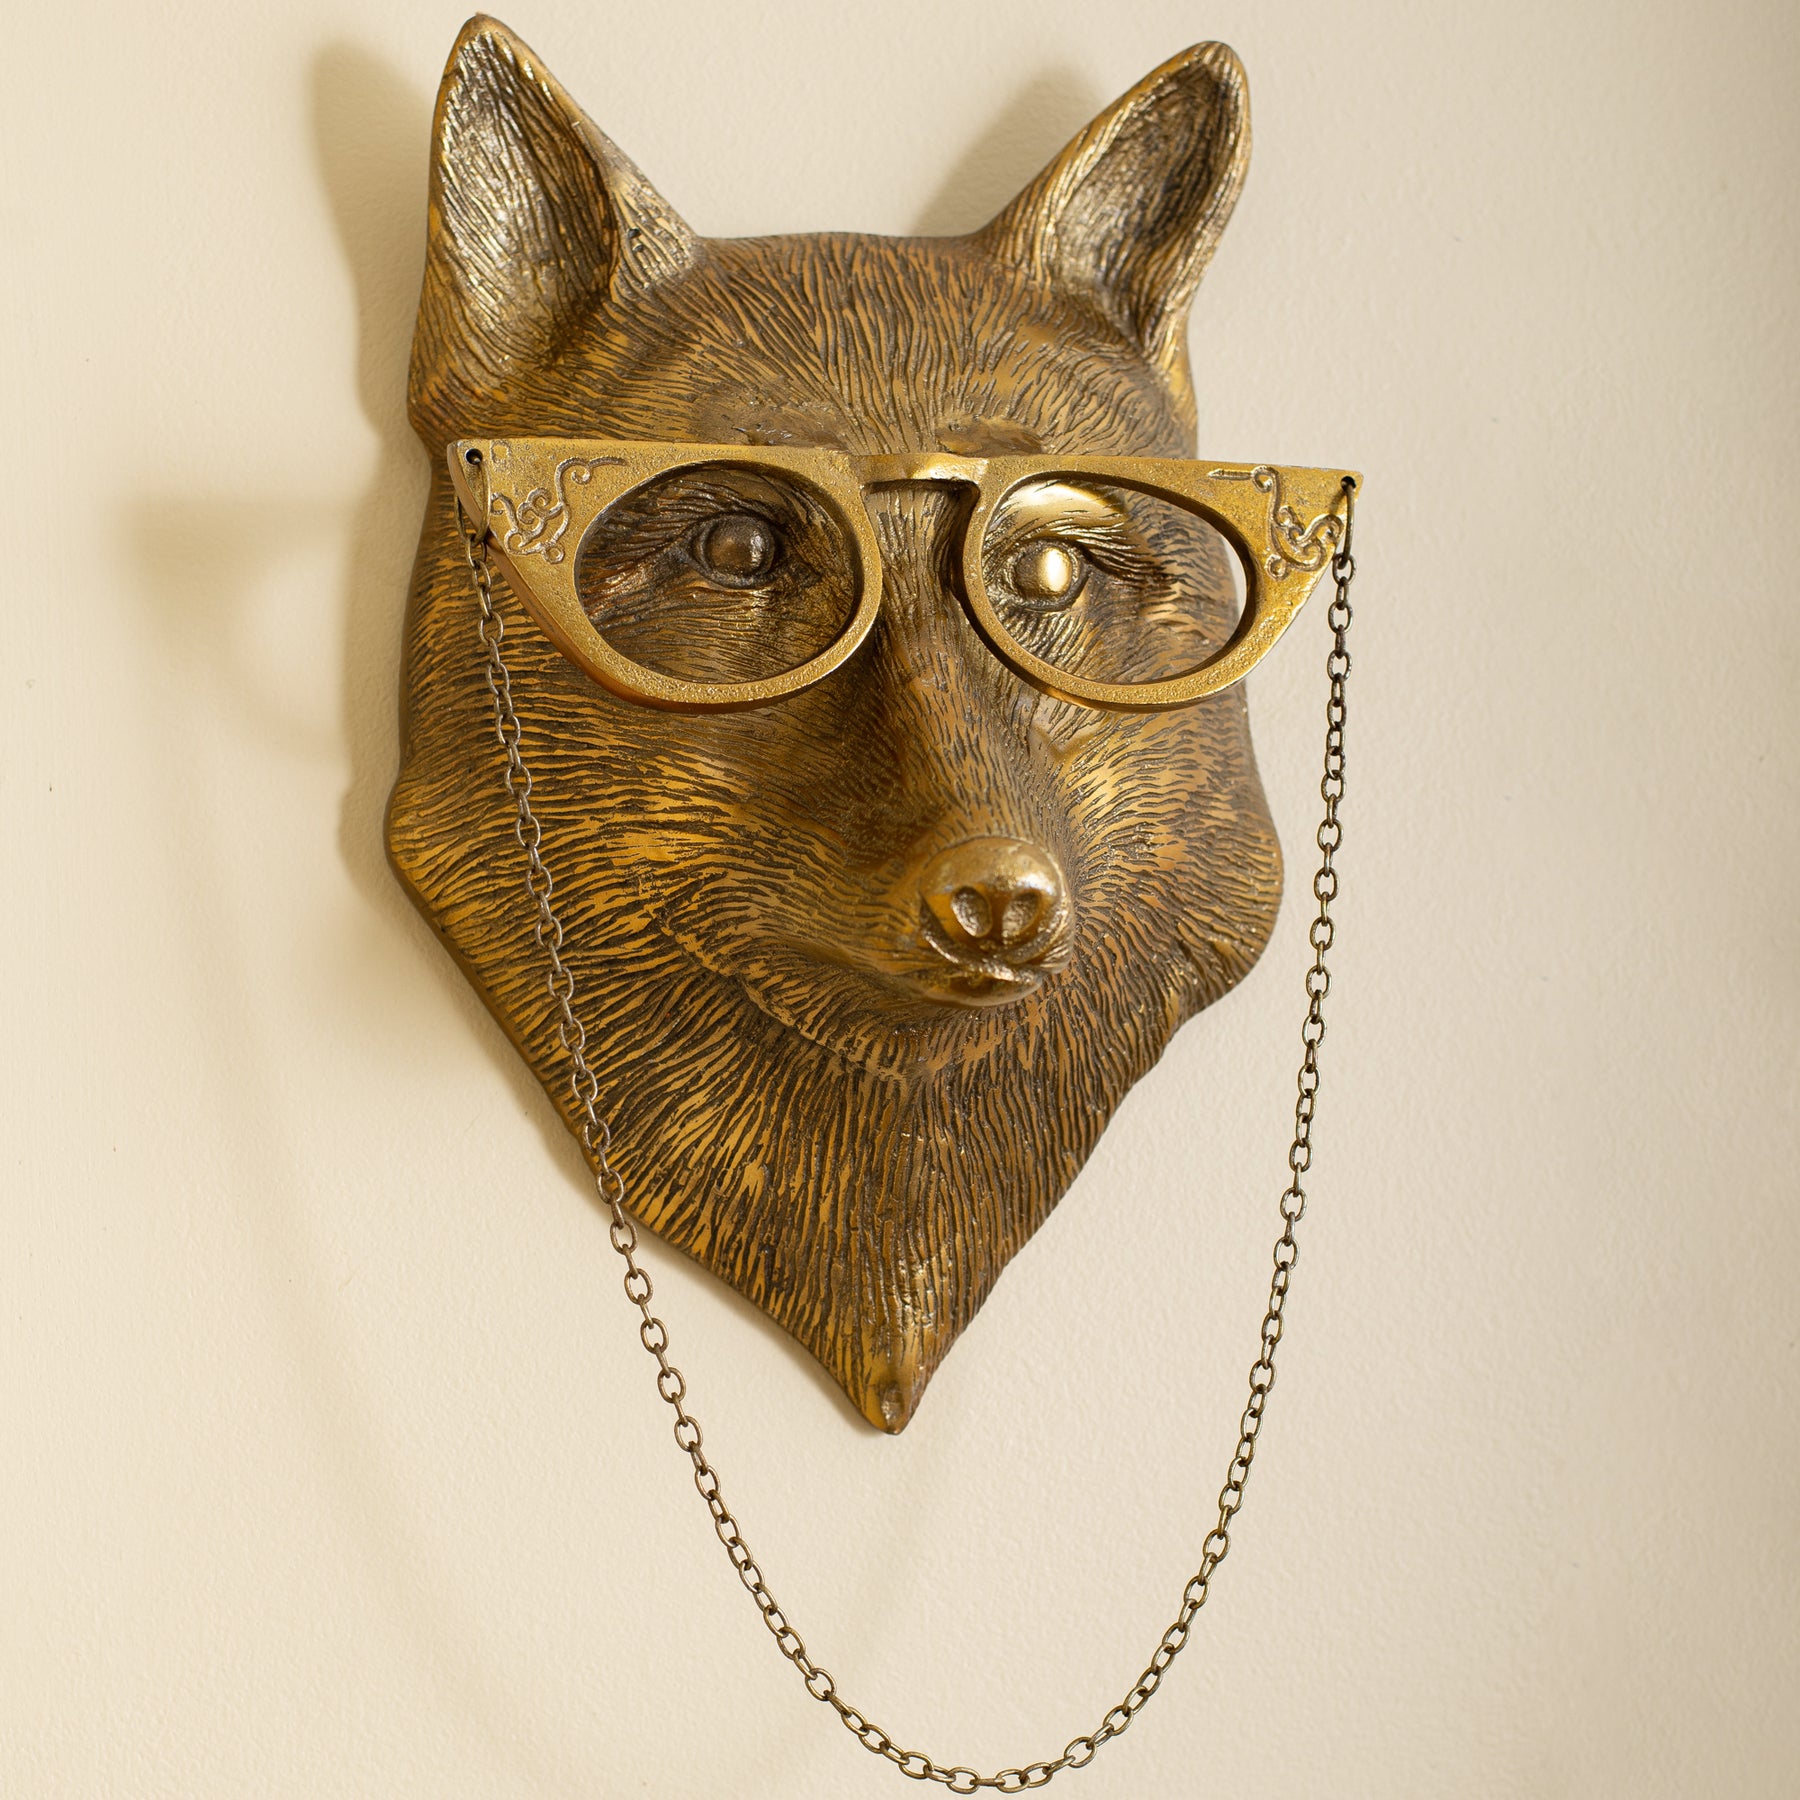 Eric Eloise Al Darby with Bronzed Eloise Fox Glasses Trading Collection – - the + Creek Lady